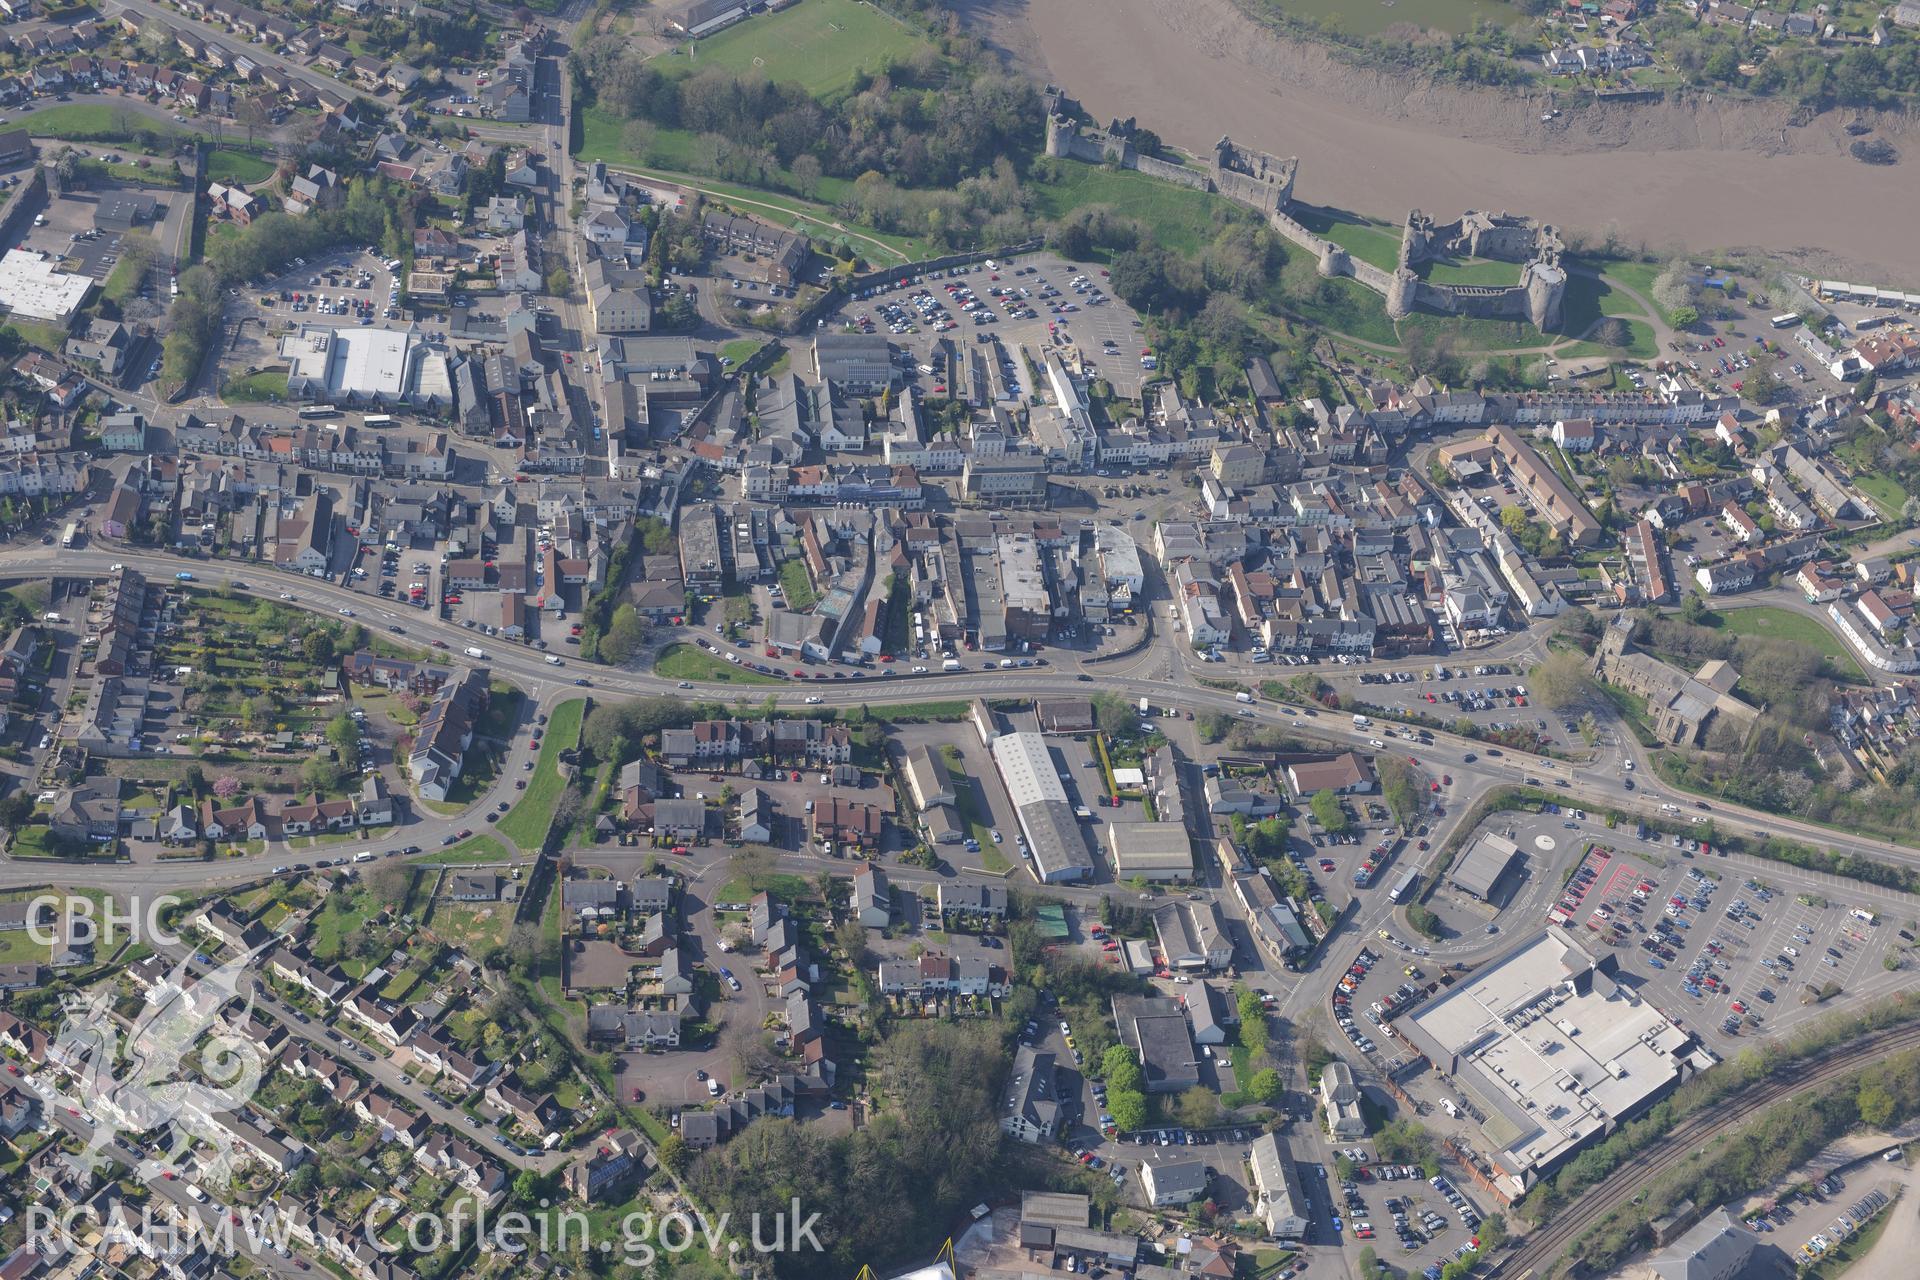 Chepstow including the Castle, St. Mary's Church, the Old Almshouses, the Town Wall and the Palace Theatre. Oblique aerial photograph taken during the Royal Commission's programme of archaeological aerial reconnaissance by Toby Driver on 21st April 2015.